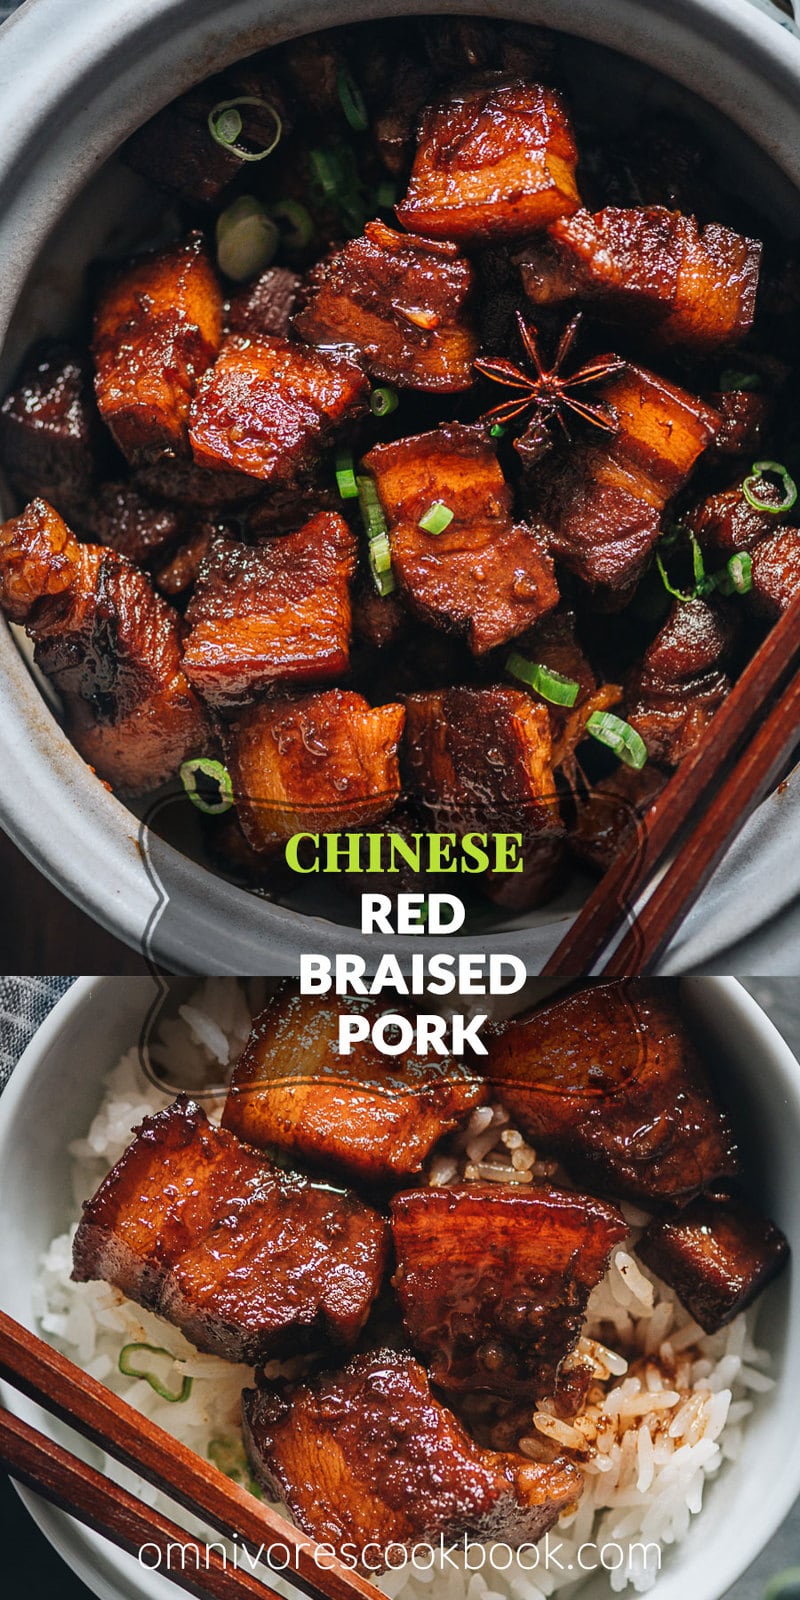 Hong Shao Rou | A Chinese classic. The tender, juicy pork is coated in a glossy sauce that is sticky, savory, sweet, and full of fragrance. It’s a perfect meal-prep dish to cook on a weekend and enjoy throughout the week.